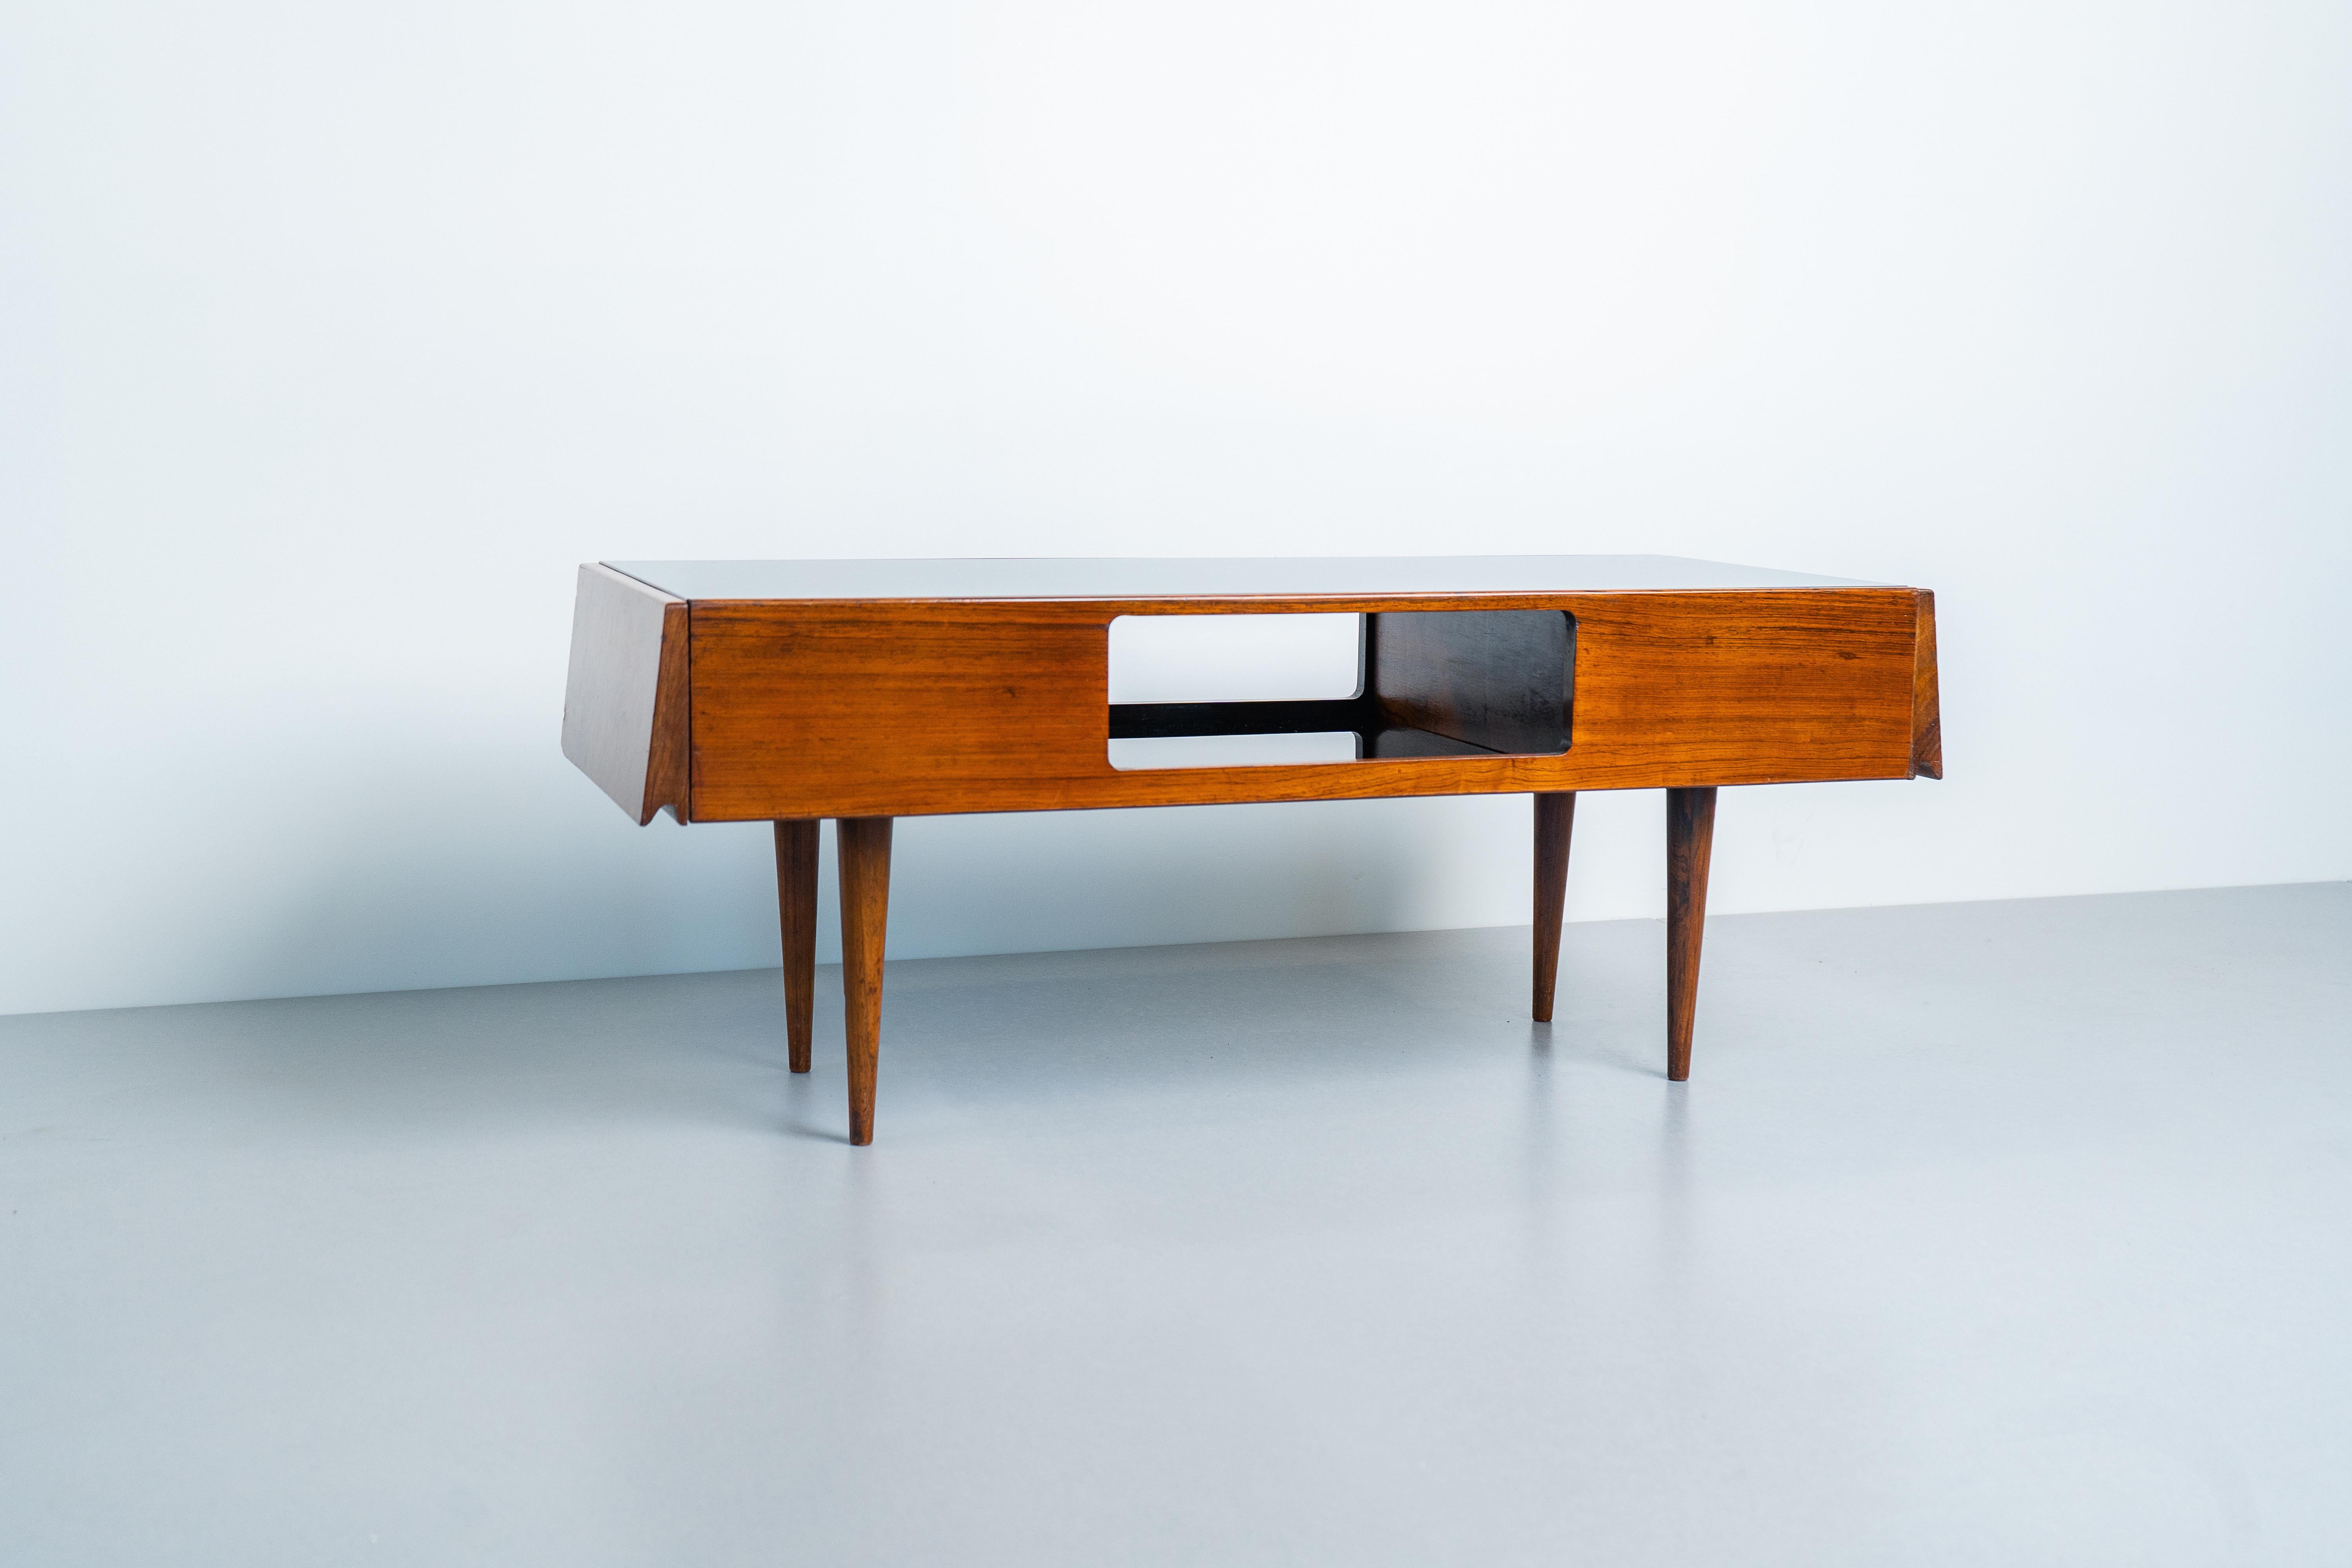 Martin Eisler (1913-1977) designed this rosewood coffee table for Forma S.A. Móveis e Objetos de Arte. It belongs to a furniture category commonly found during the midcentury period and extensively produced by Forma: the showcase table.
The coffee